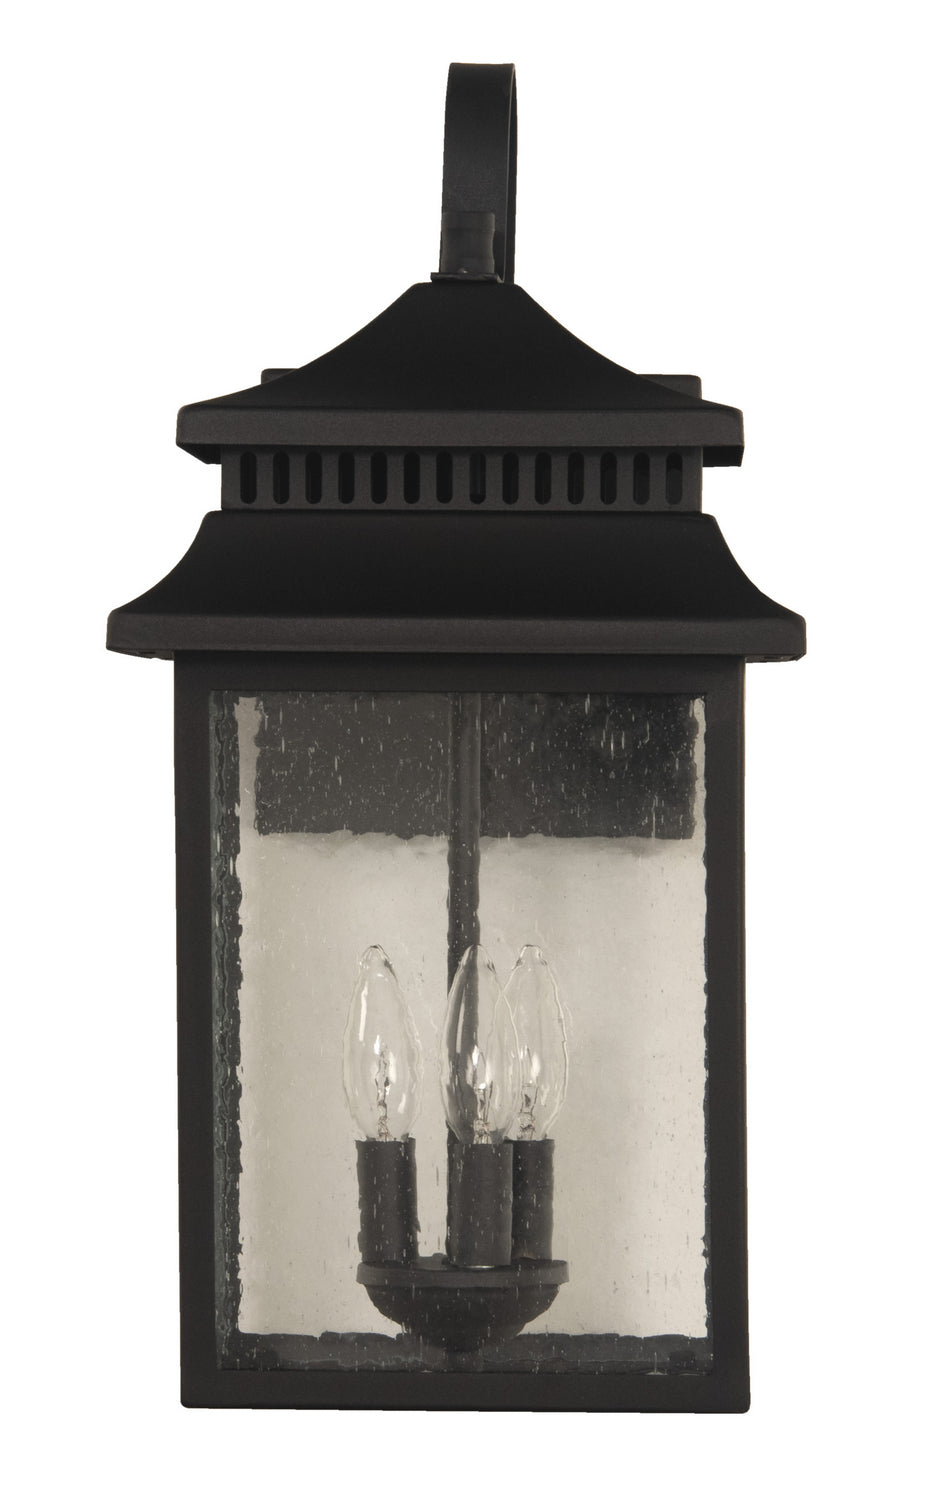 Craftmade Three Light Outdoor Wall Mount from the Crossbend collection in Textured Black finish